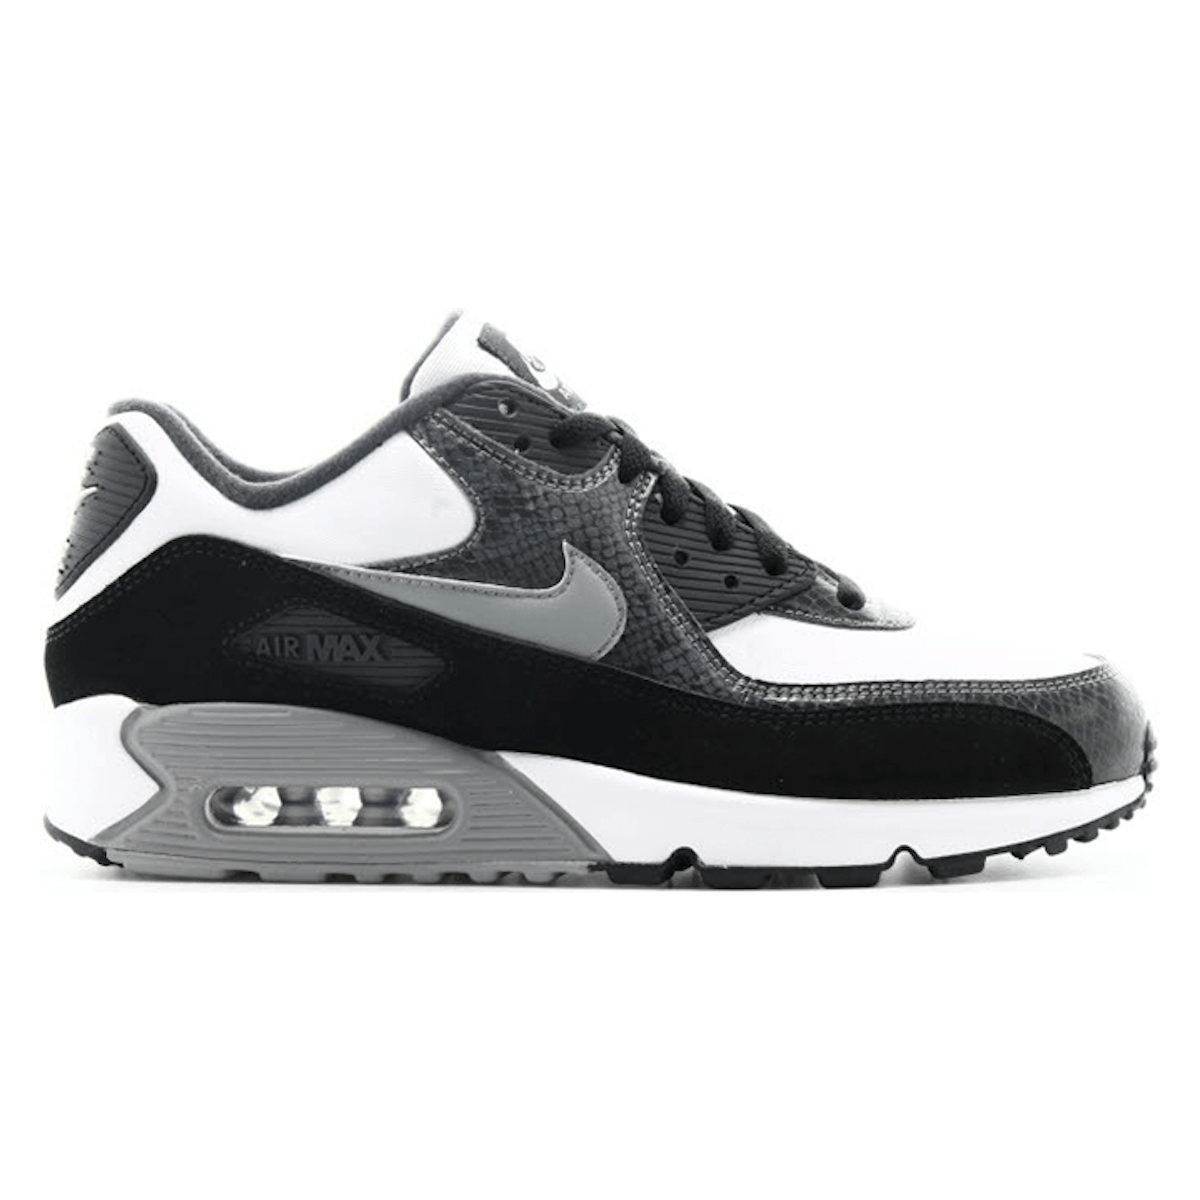 Nike Air Max 90 QS Python Pack "Grey Anthracite"